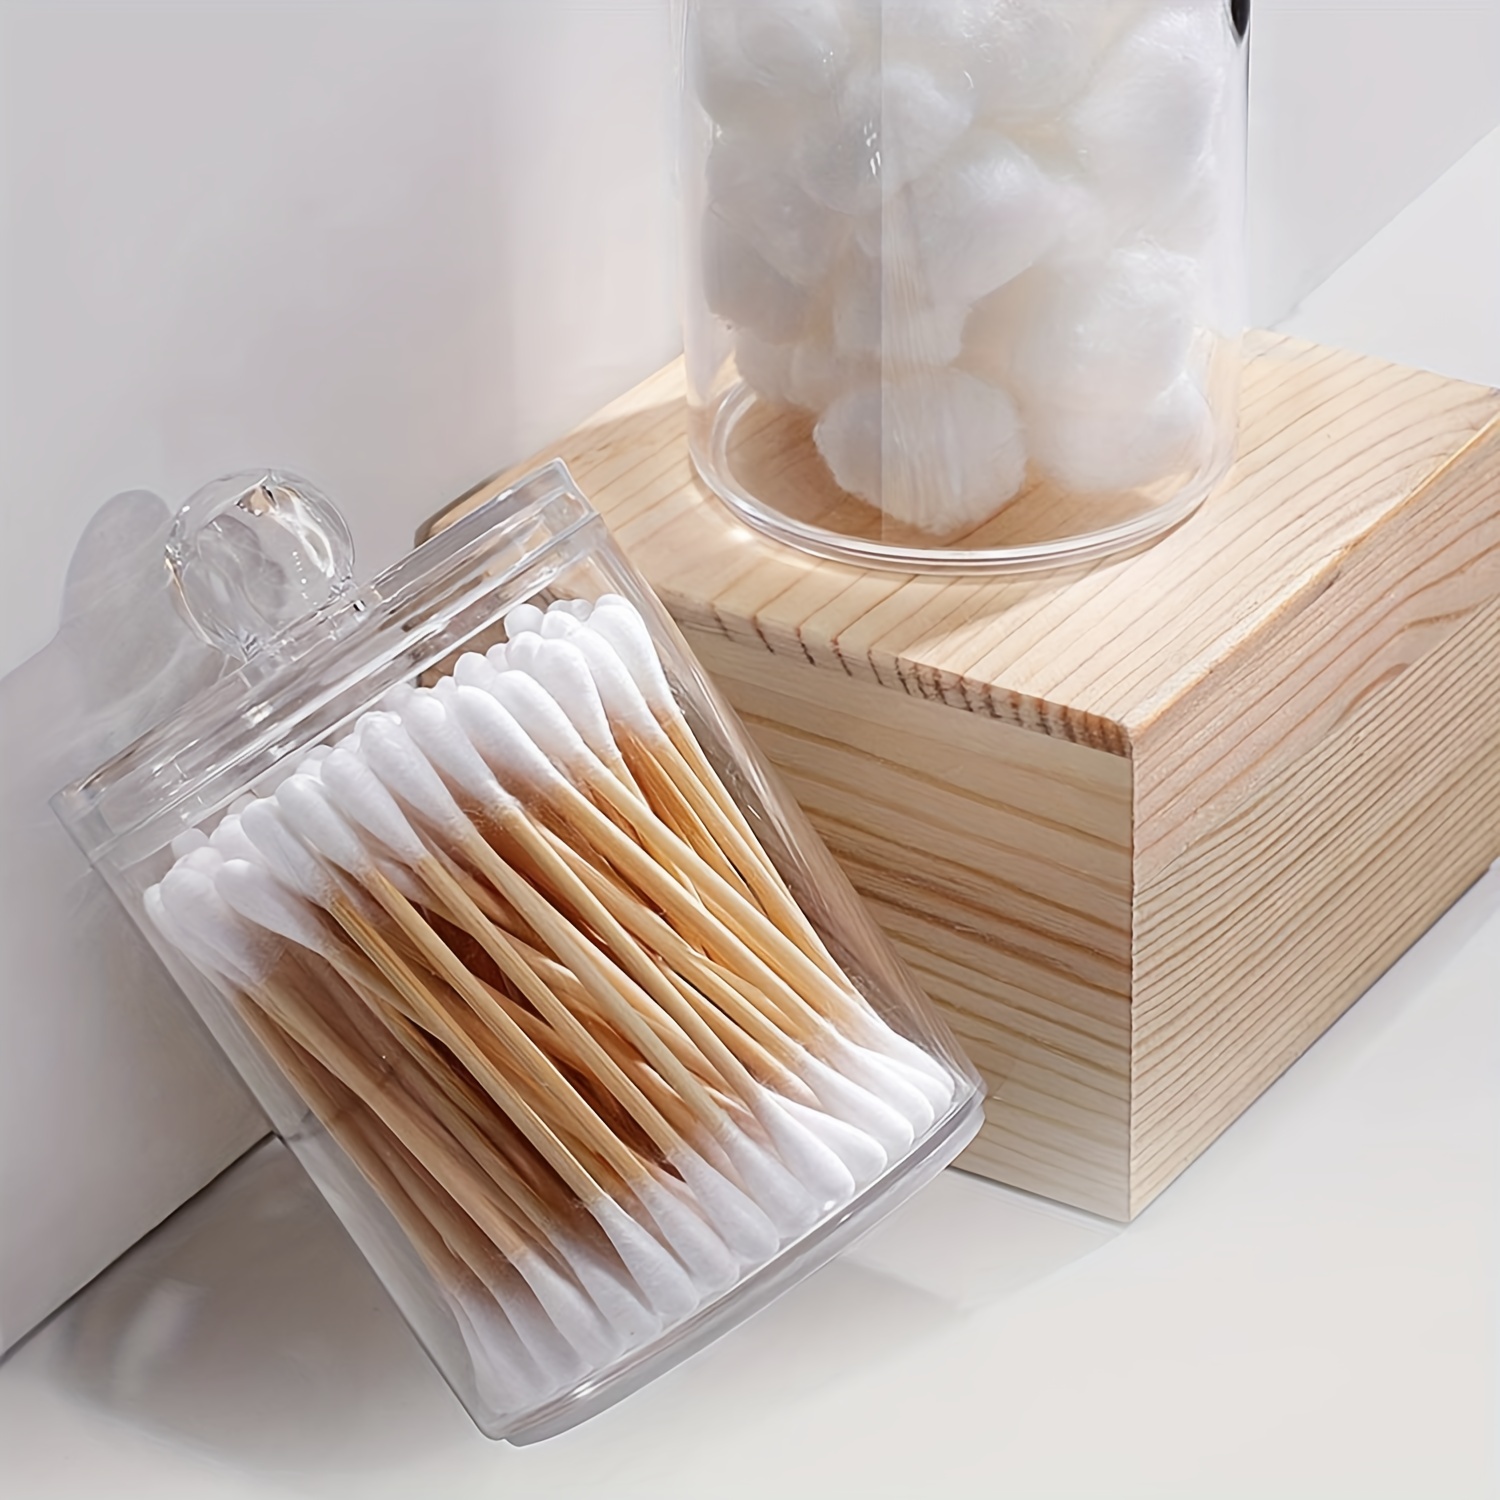 WeGuard 6 Pack Qtip Holder Dispenser for Cotton Ball/Cotton Swab/Cotton Round Pads/Floss, 10 oz Clear Plastic Apothecary Jar Set for Bathroom Canister